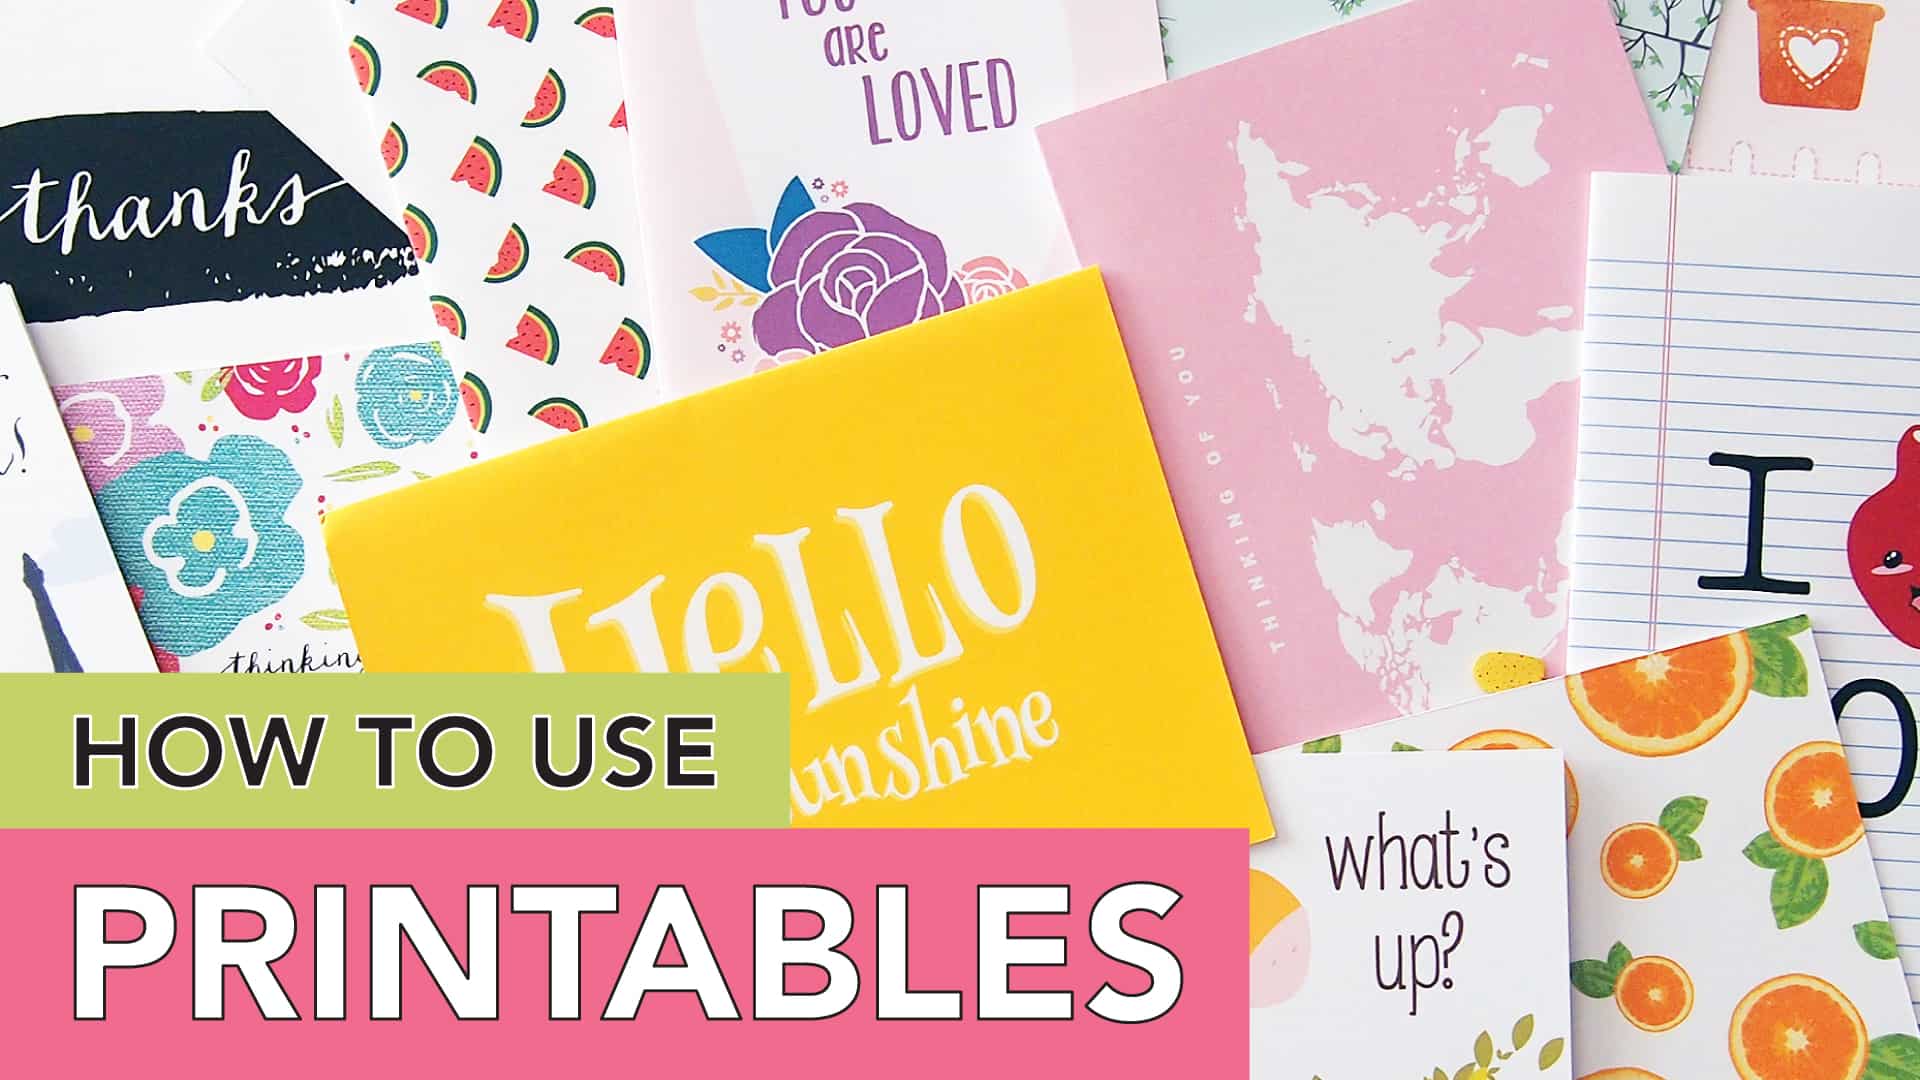 how-to-use-printables-basics-and-freebie-resources-tortagialla